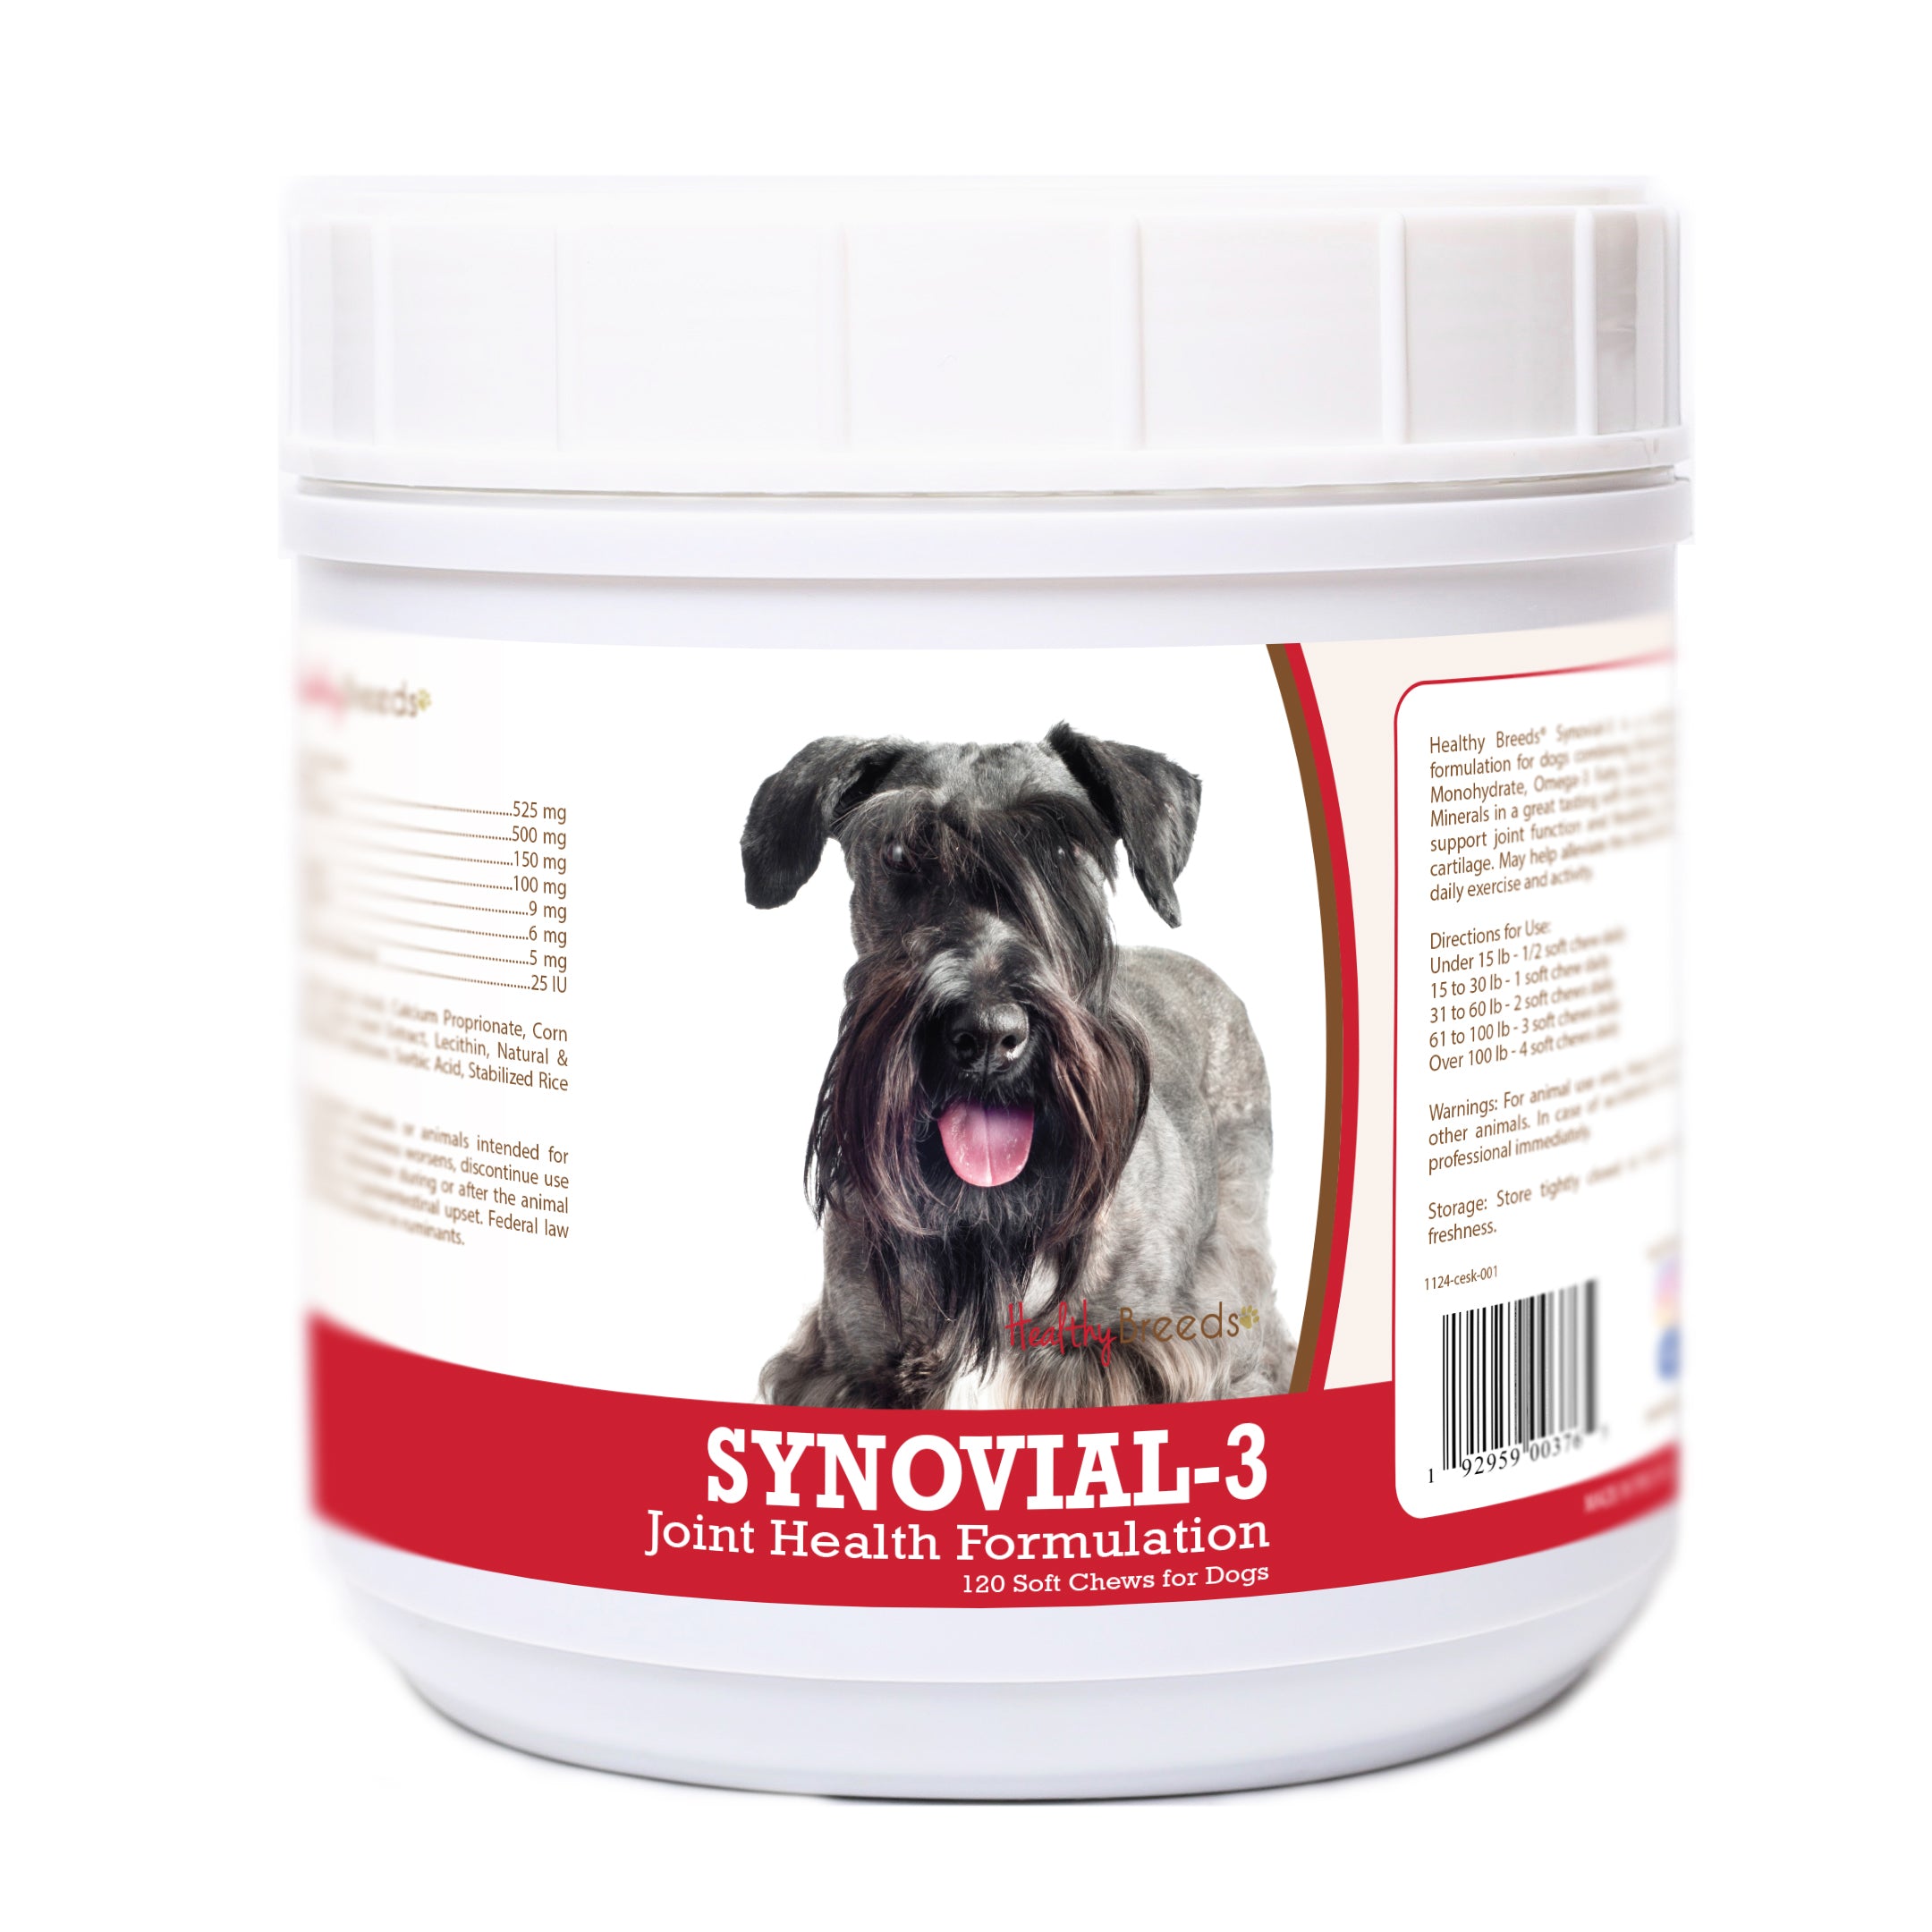 Cesky Terrier Synovial-3 Joint Health Formulation Soft Chews 120 Count